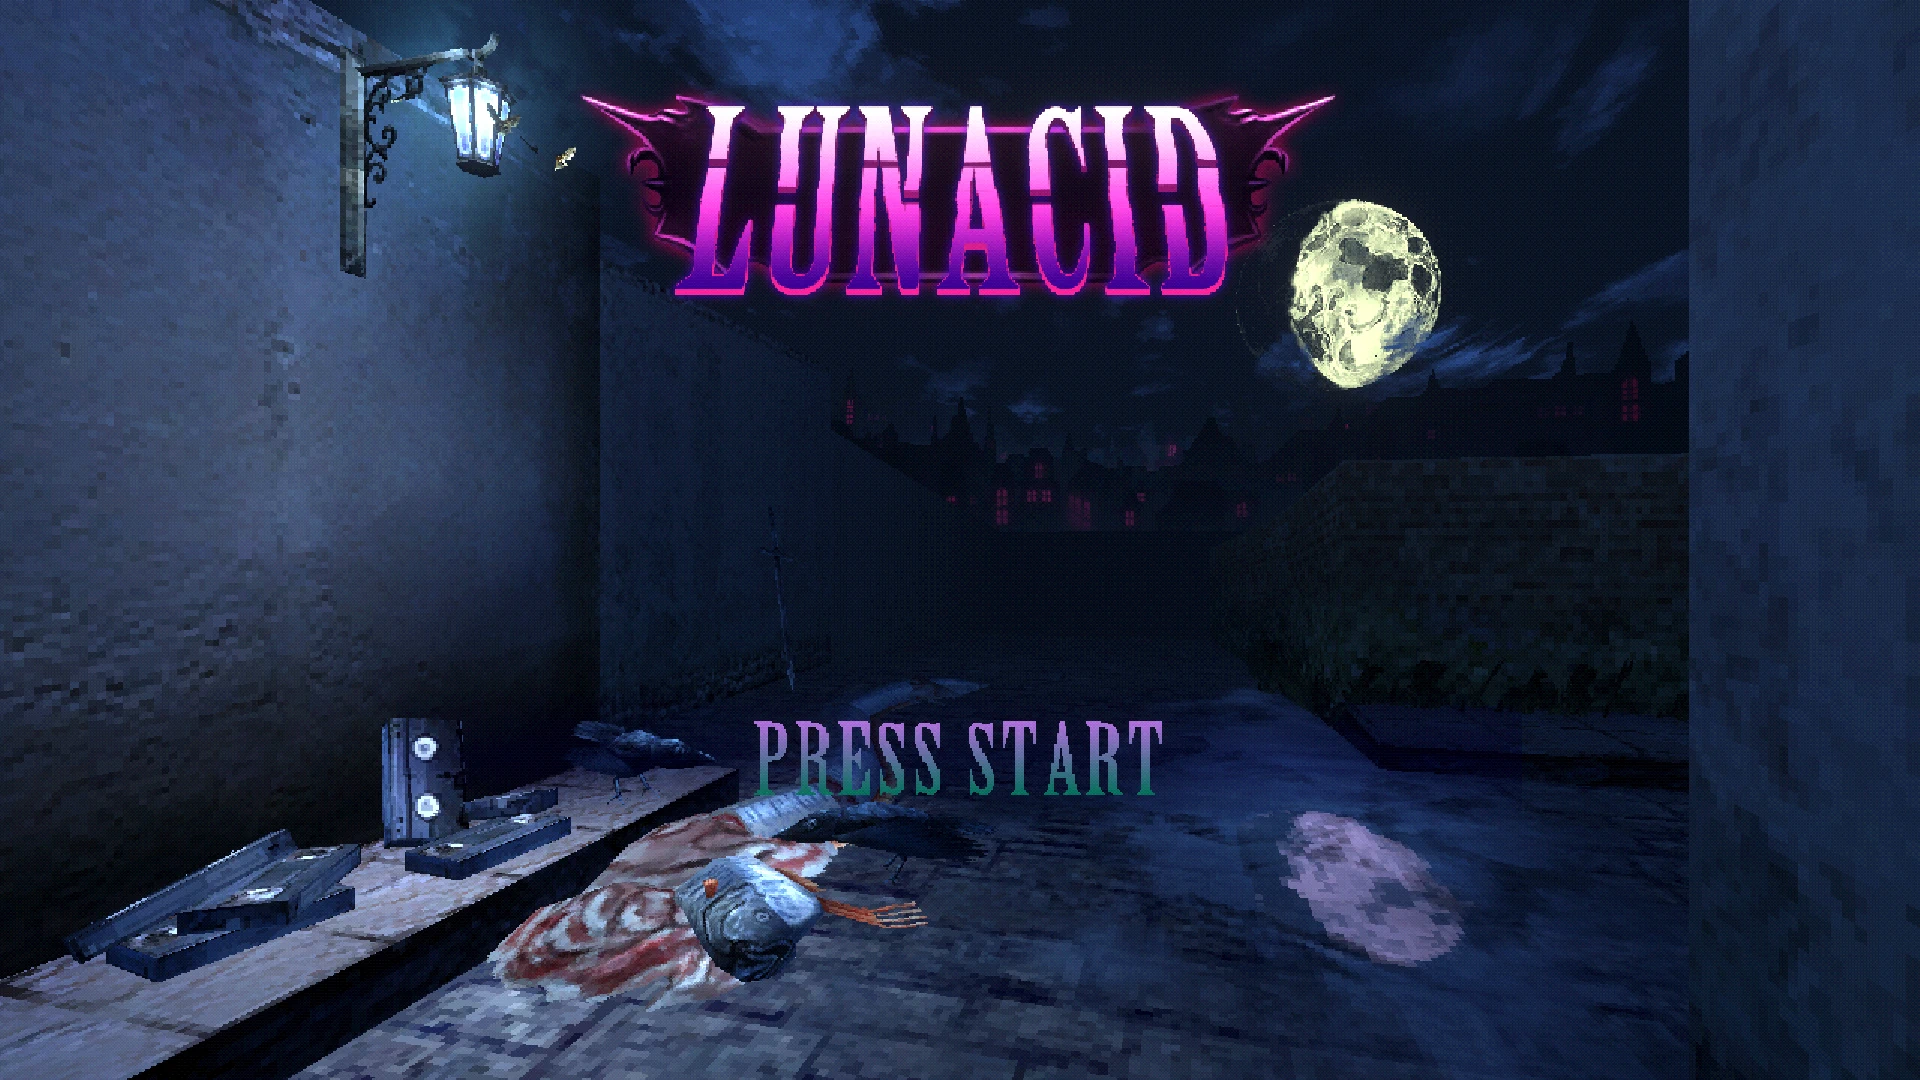 The title screen of Lunacid.